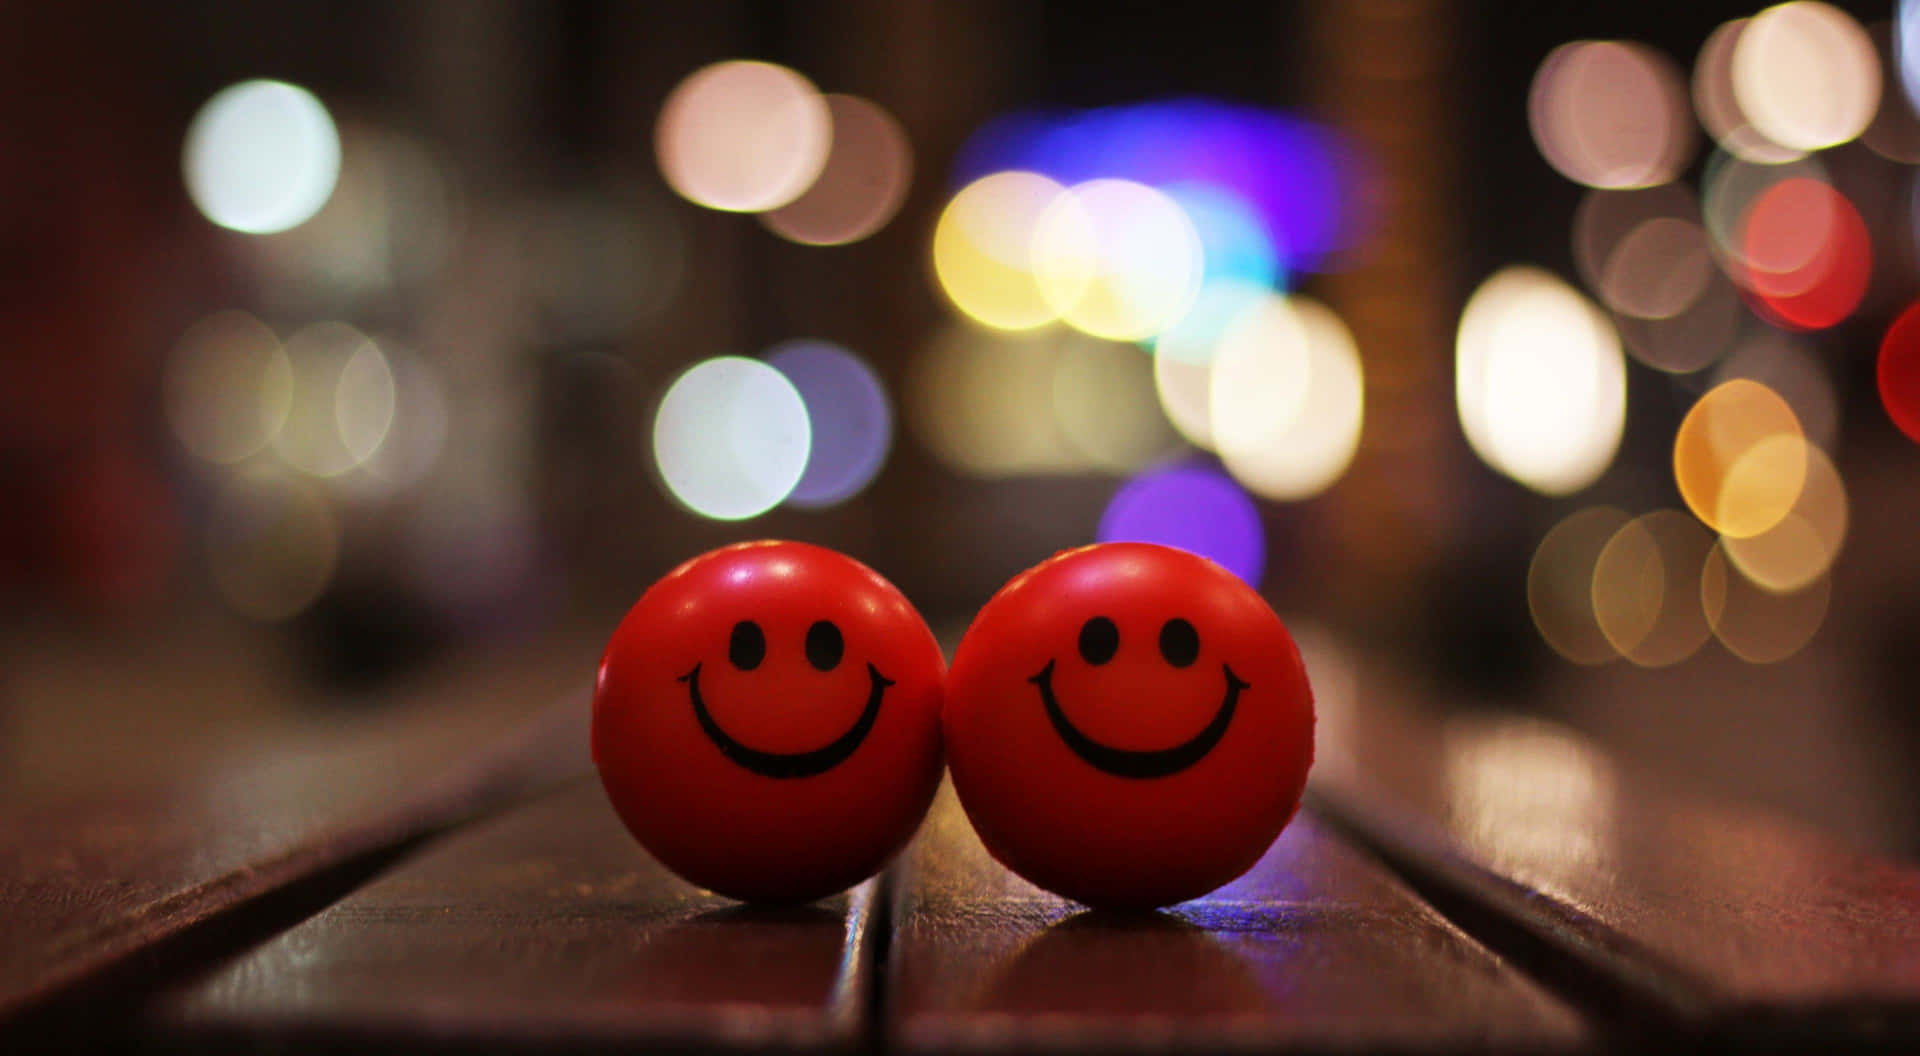 Two Red Balls On A Wooden Bench